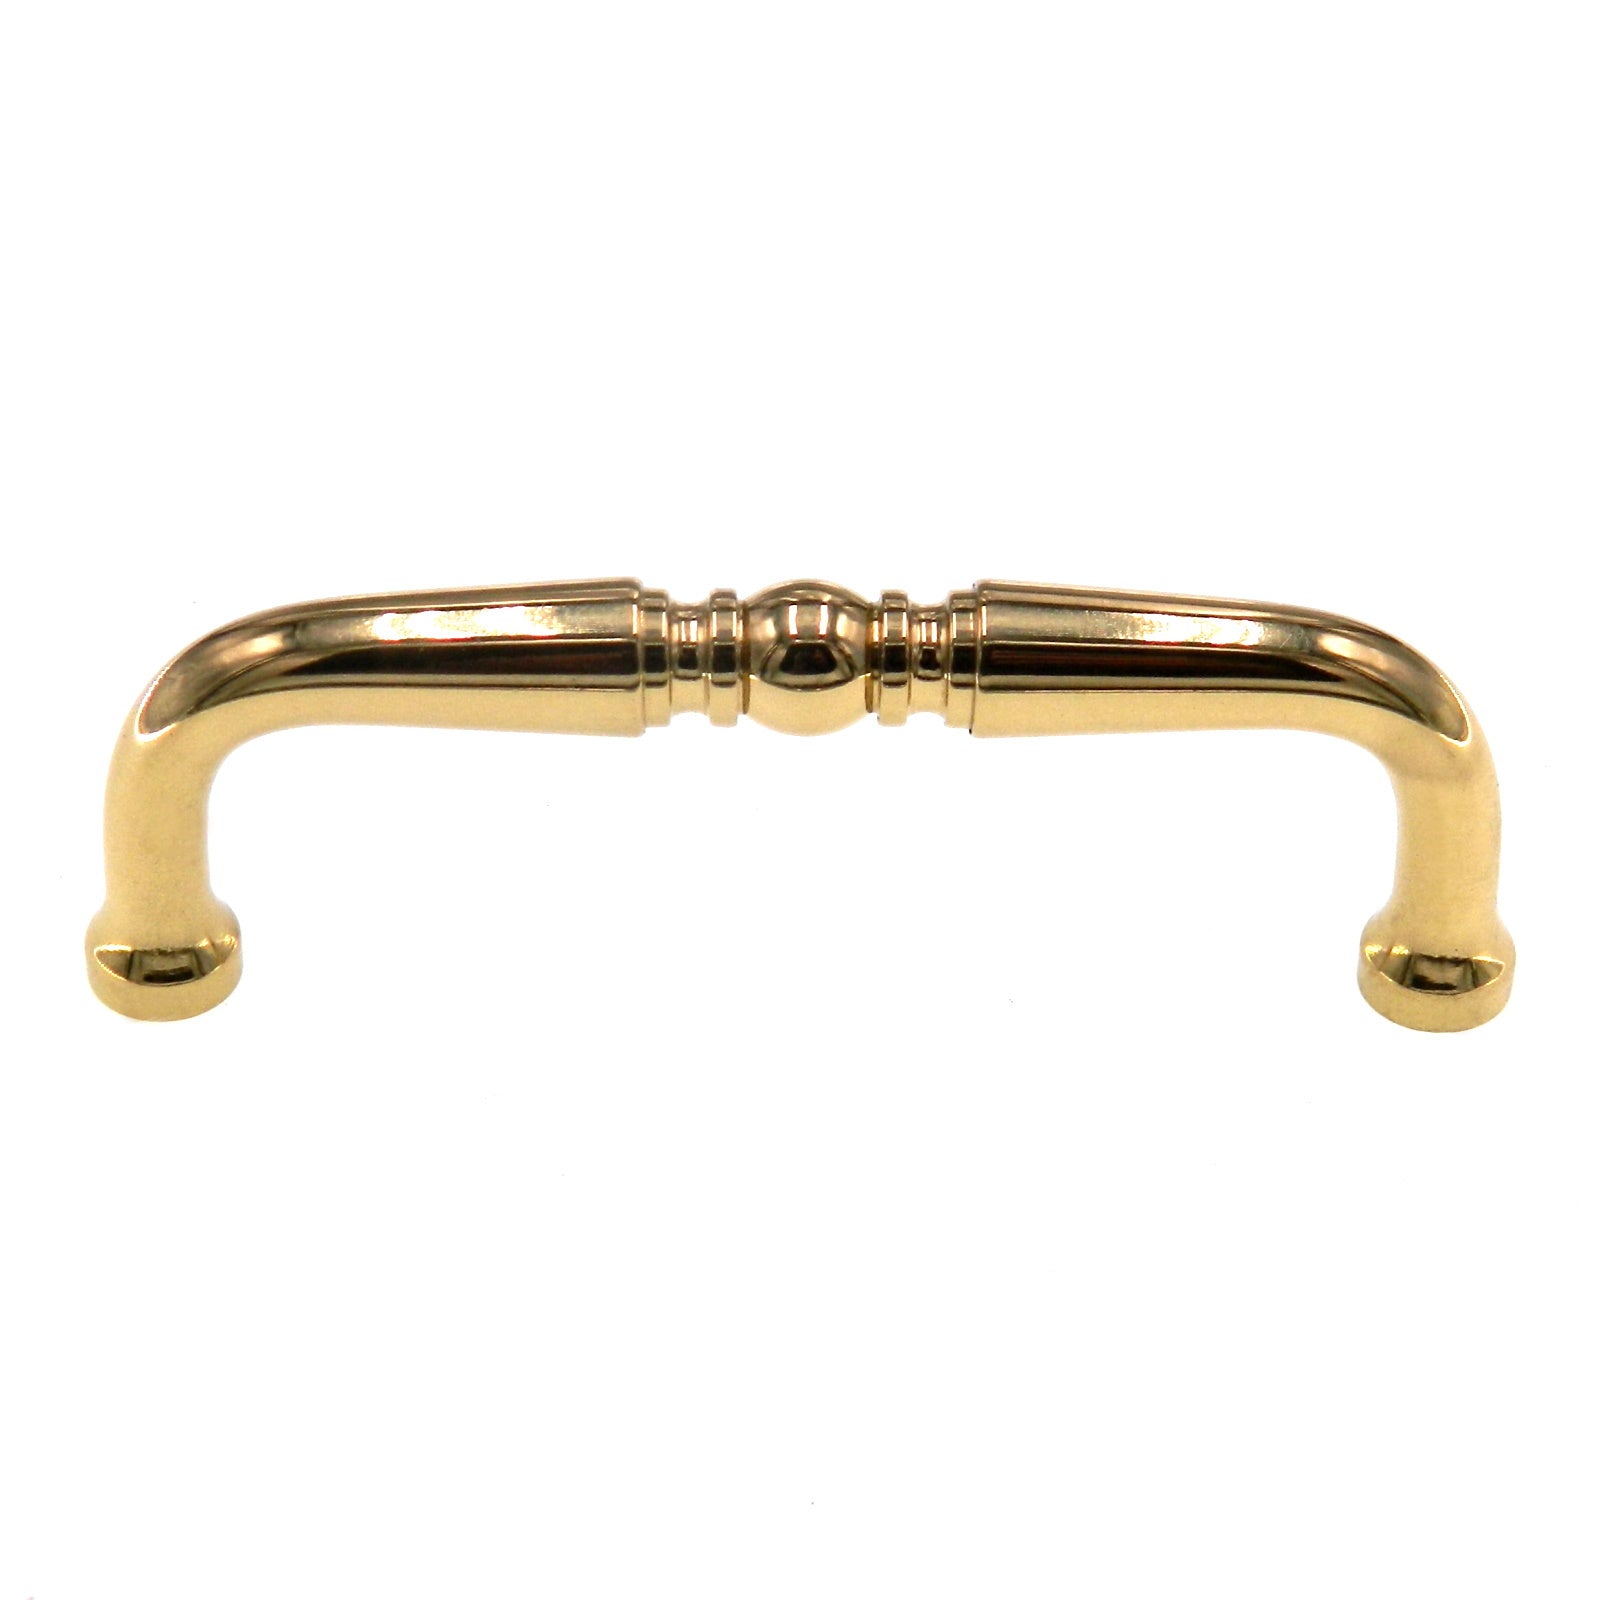 Amerock Allison Polished Brass Solid Brass 3" Ctr.  Cabinet Arch Pull Handle 553